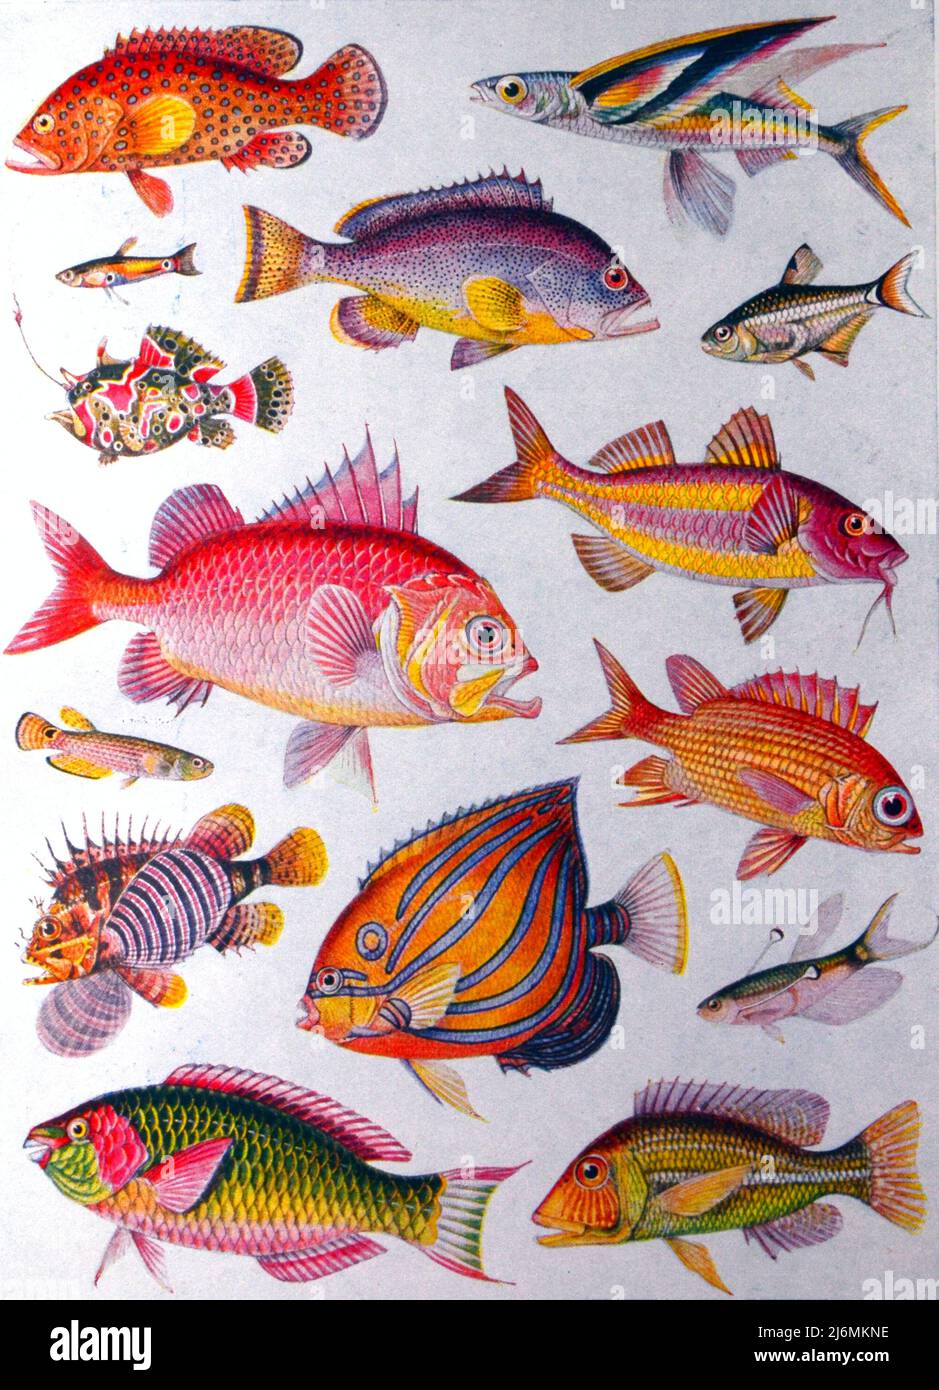 Vintage or archival illustration or drawing or images of fish or fishes or marine life Stock Photo